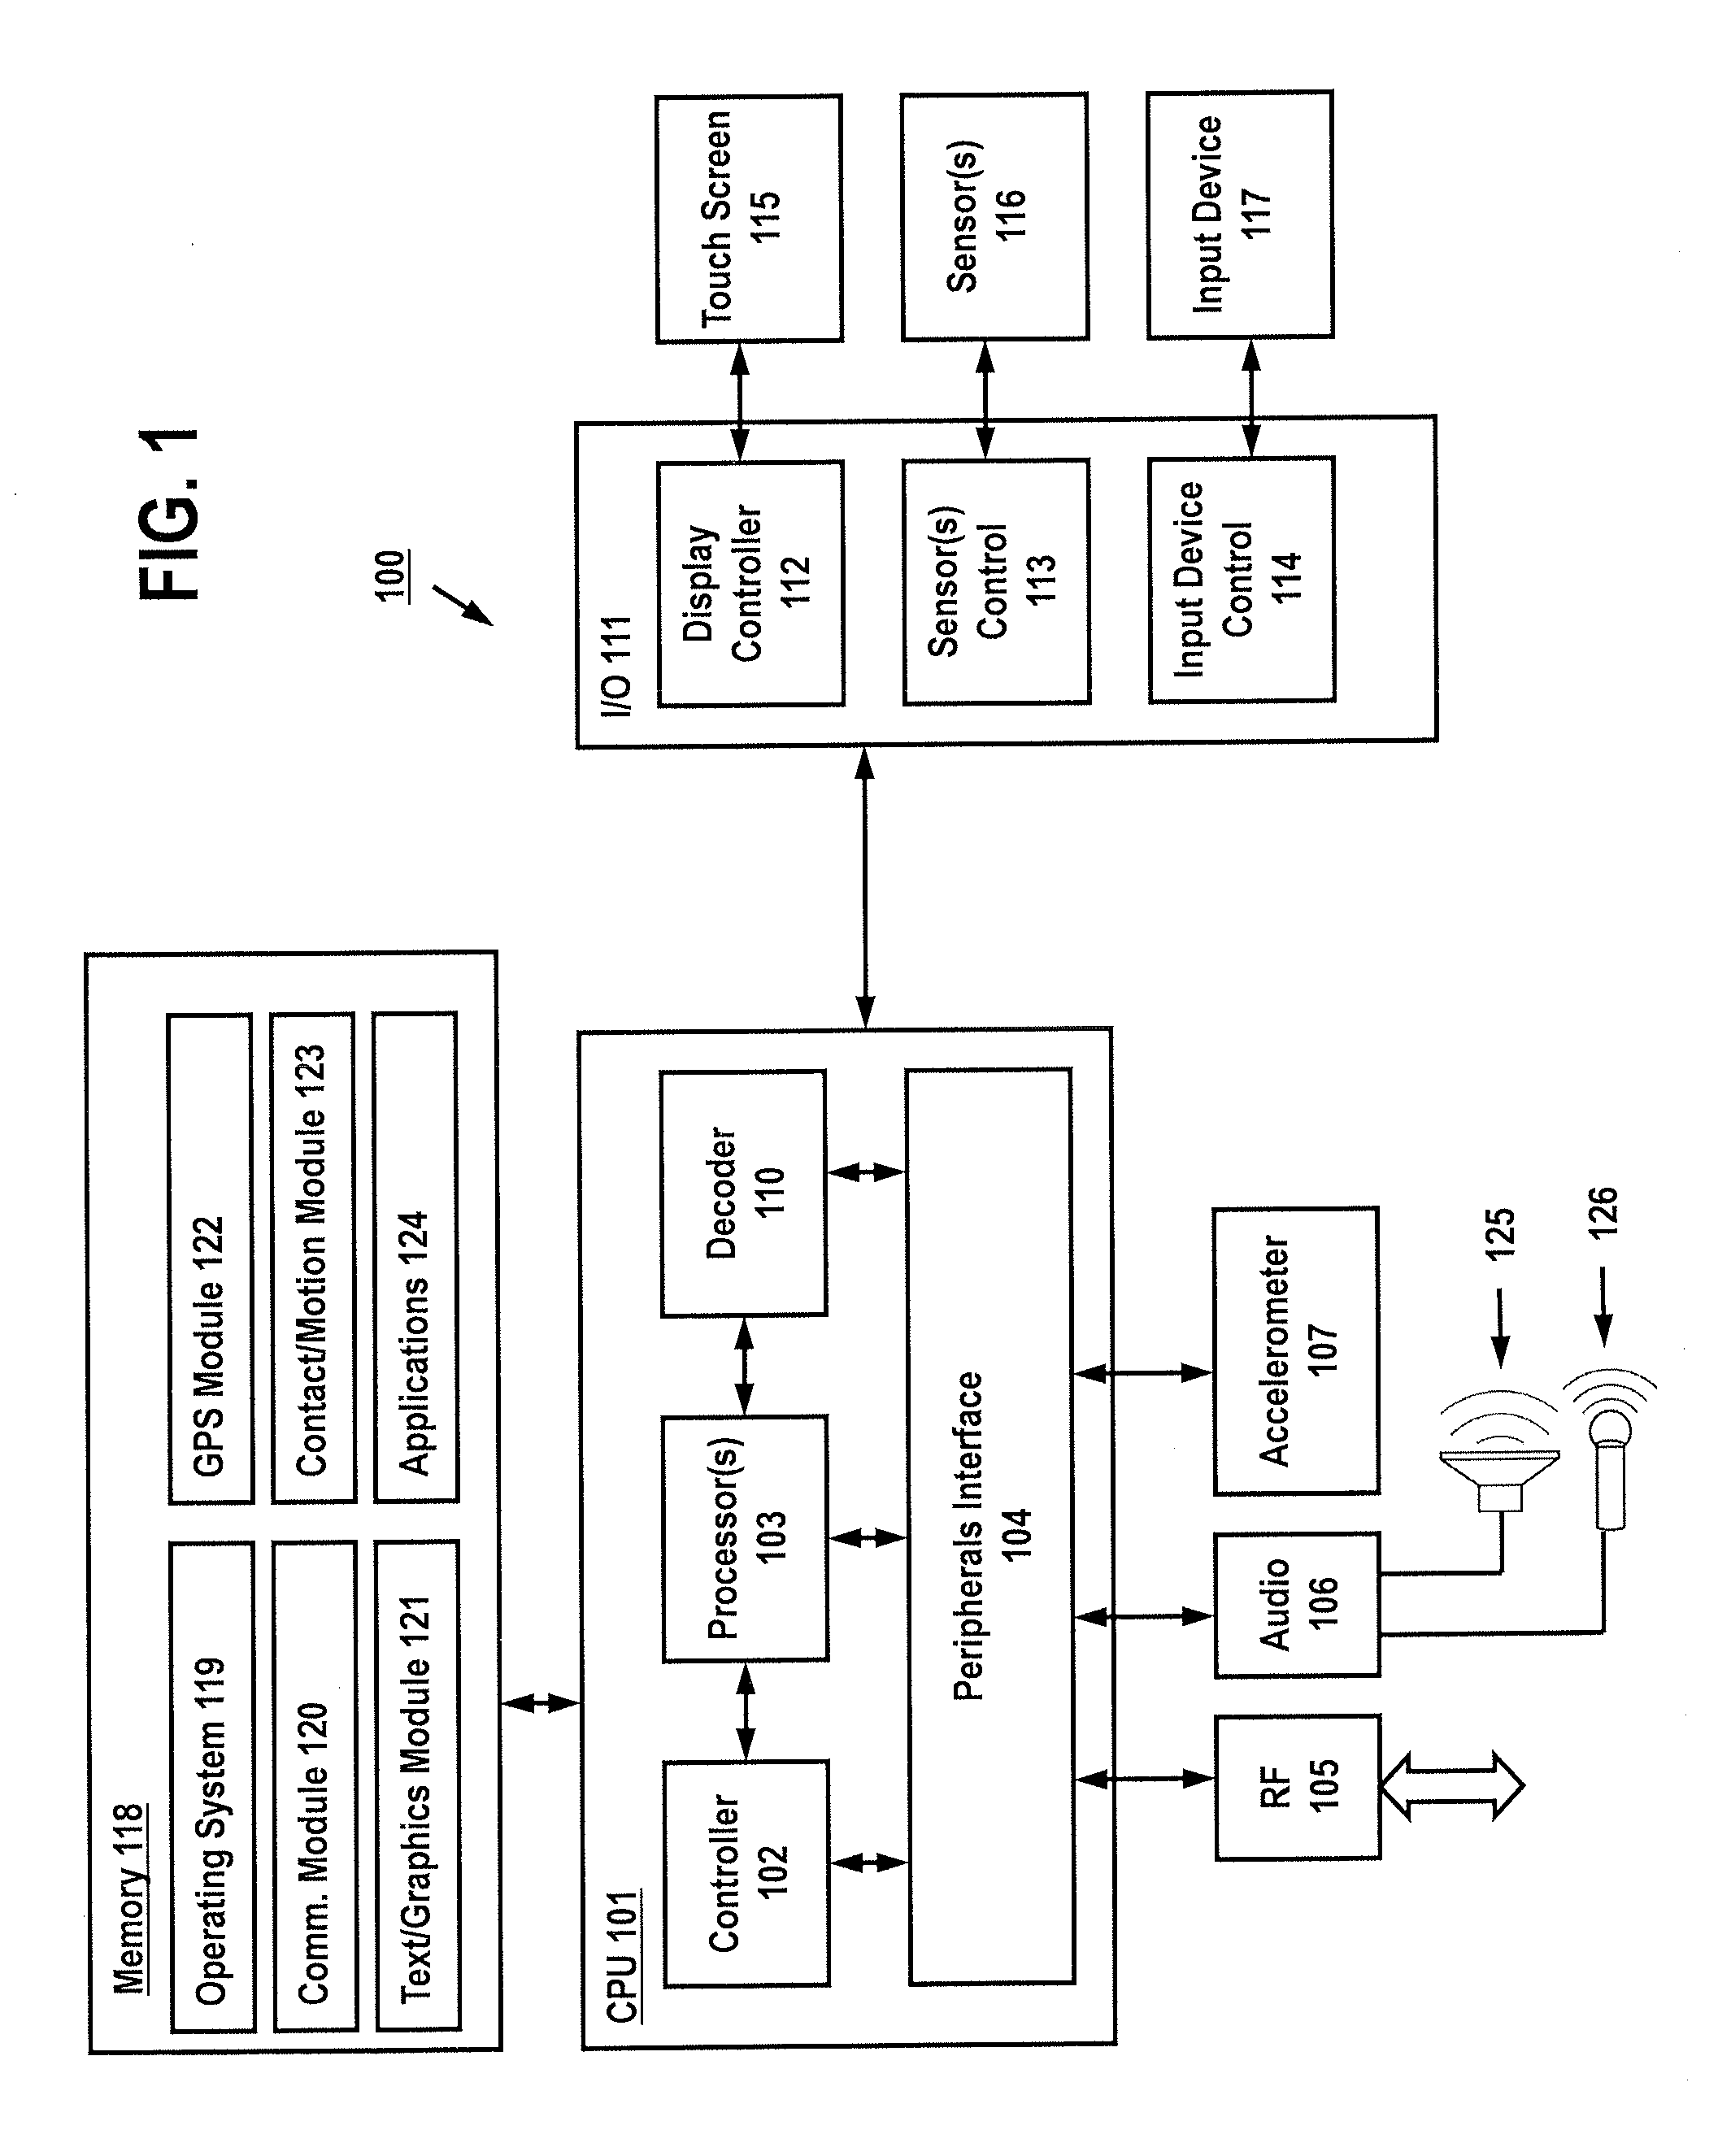 Systems Apparatus and Methods for Determining Computer Apparatus Usage Via Processed Visual Indicia